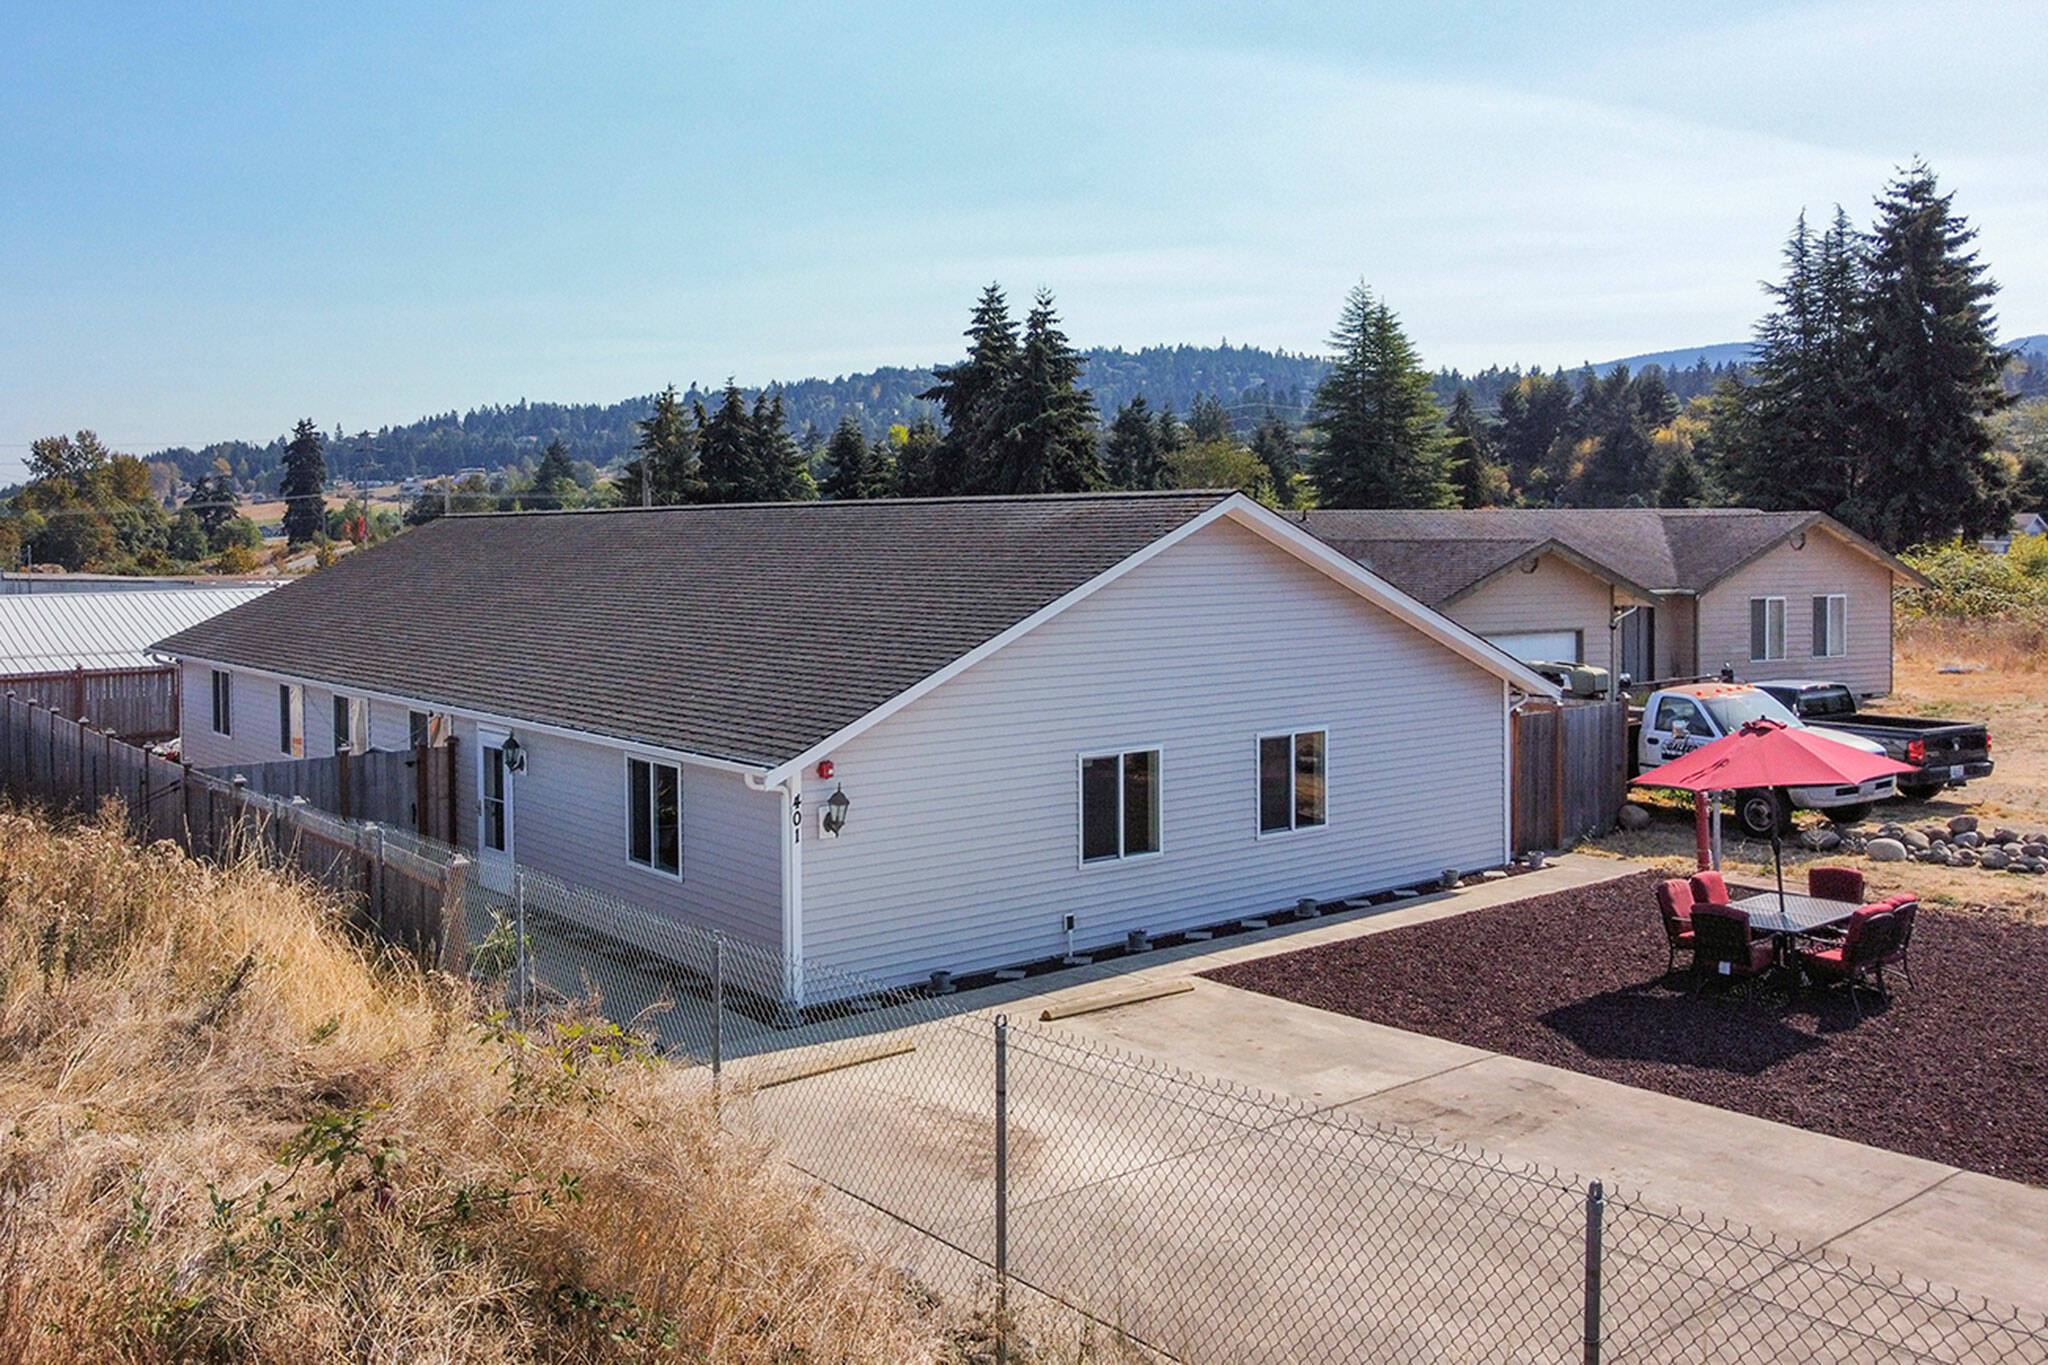 Photo courtesy Melanie Arrington/ North Olympic Regional Veteran’s Housing Network (NORVHN) recently purchased a home in Sequim near U.S. Highway 101 for Sequim area veterans. Organizers hope to have it ready by the fall.